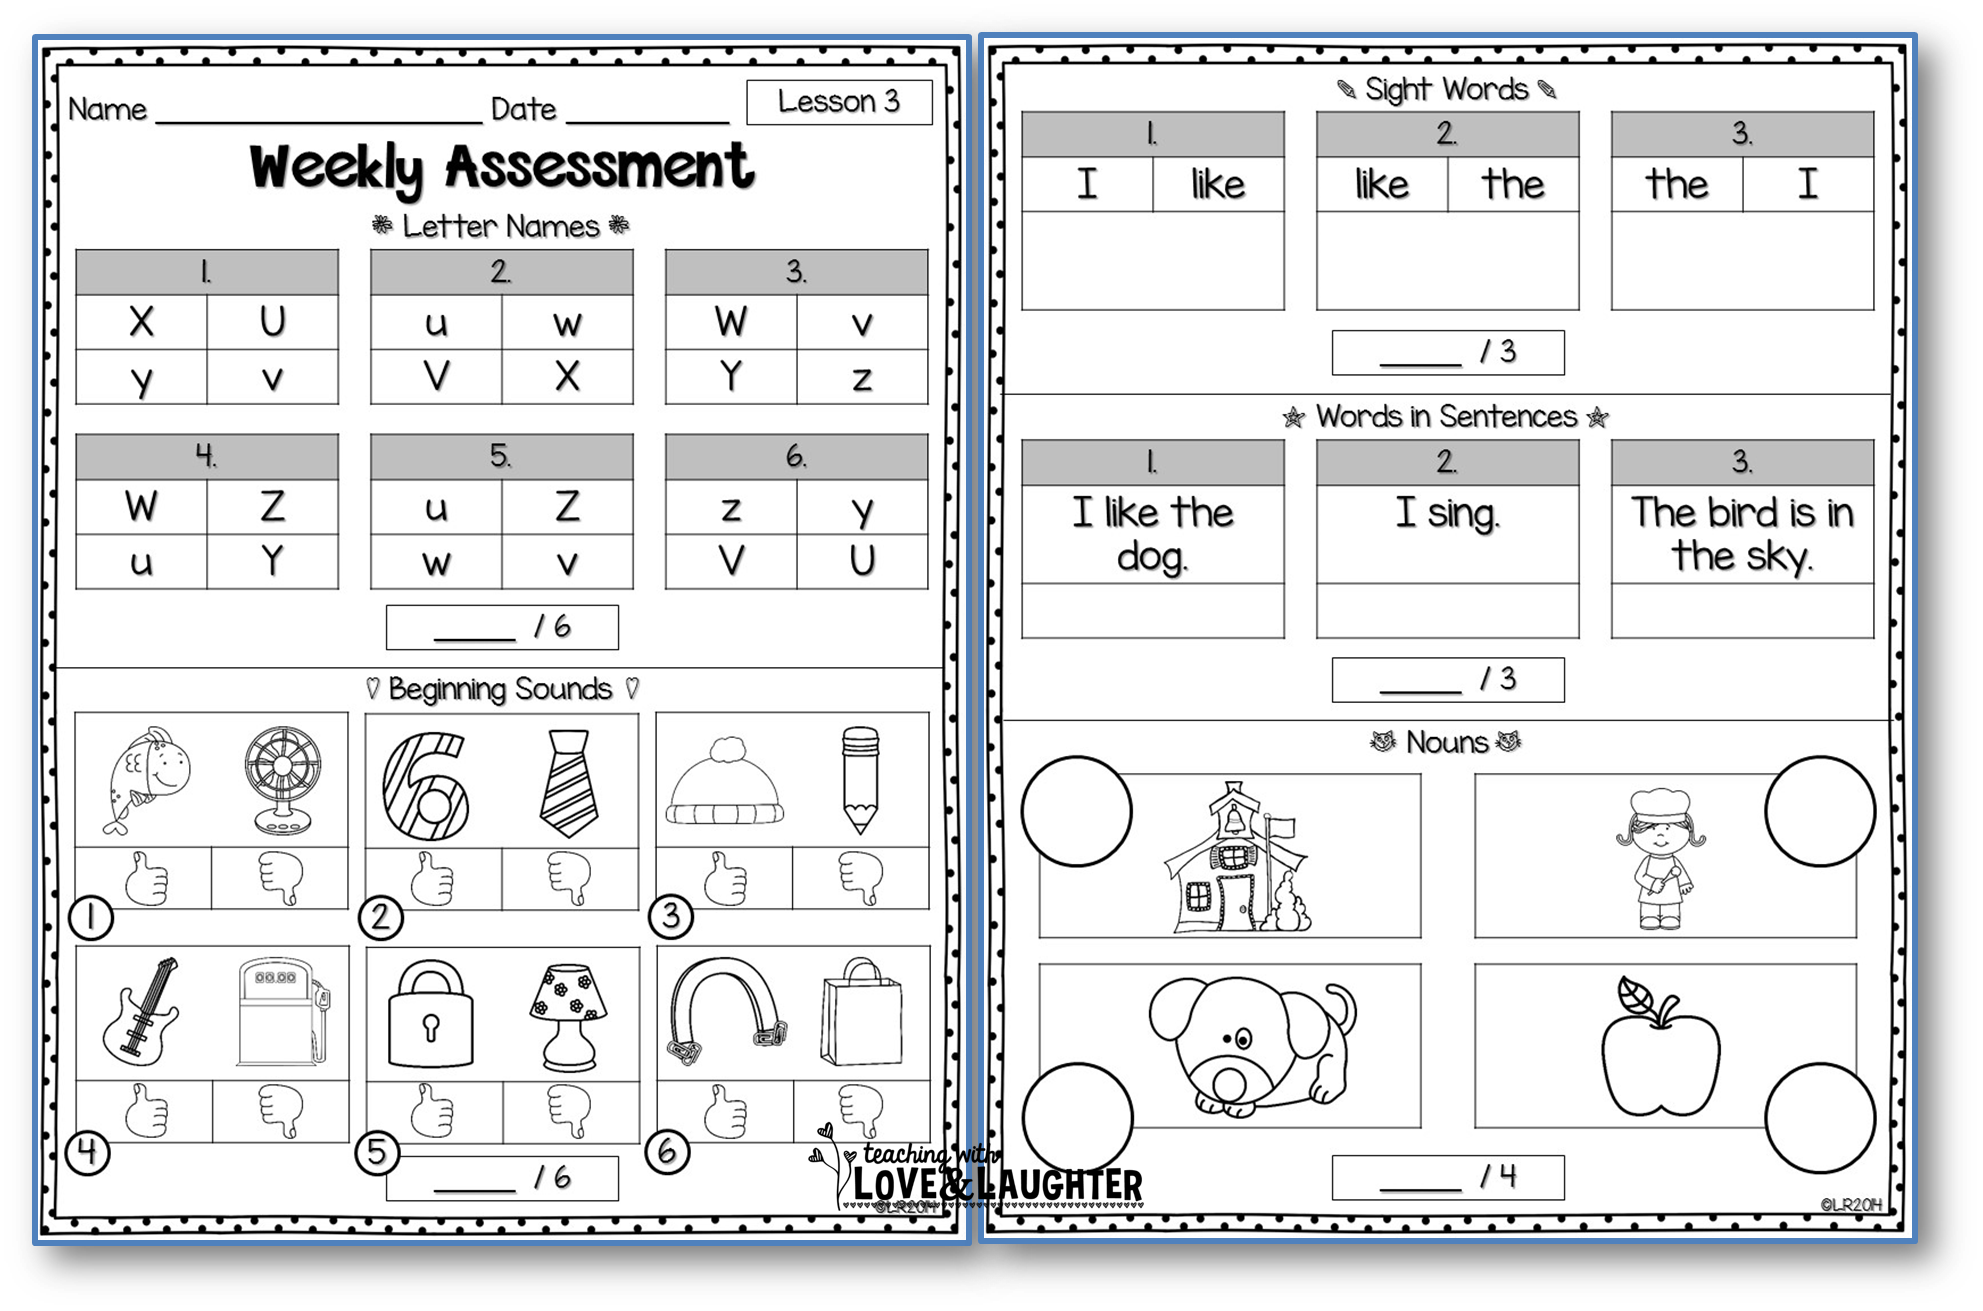 Weekly assessments unit for. Folder clipart student assessment